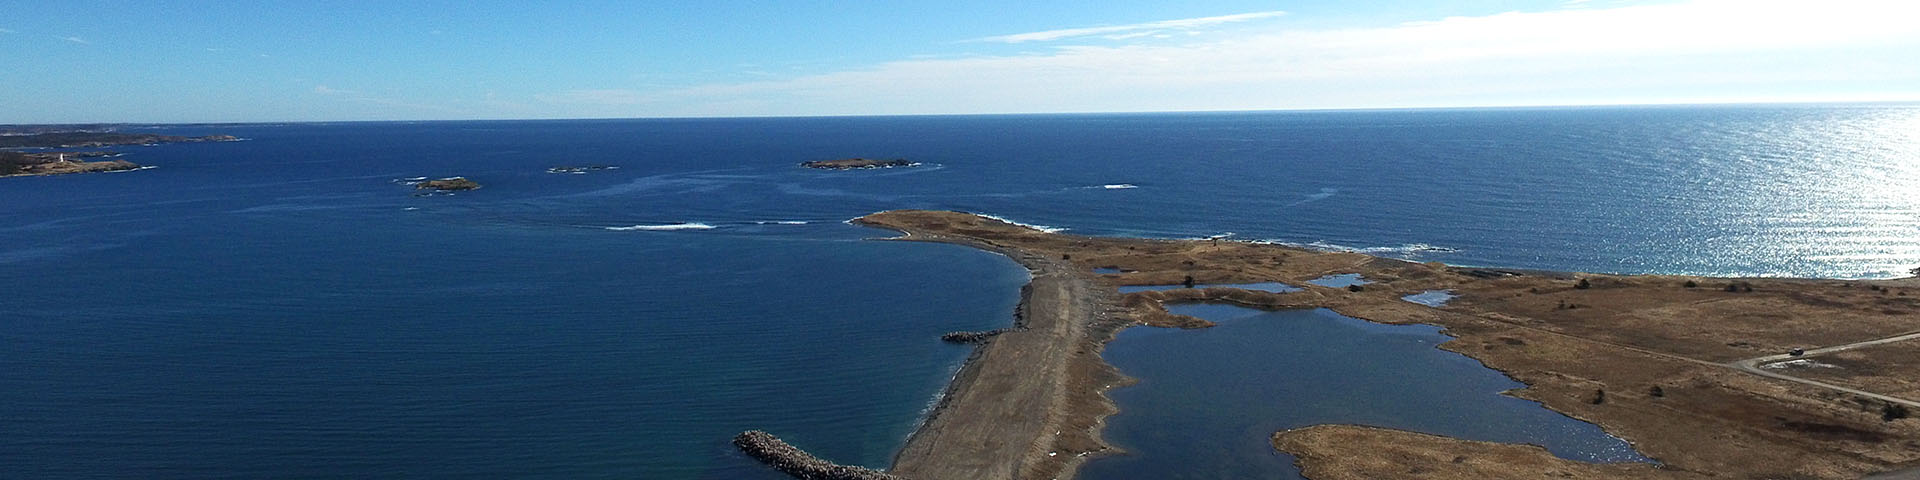 Aerial view of Rochefort Point and landscape on the ocean.